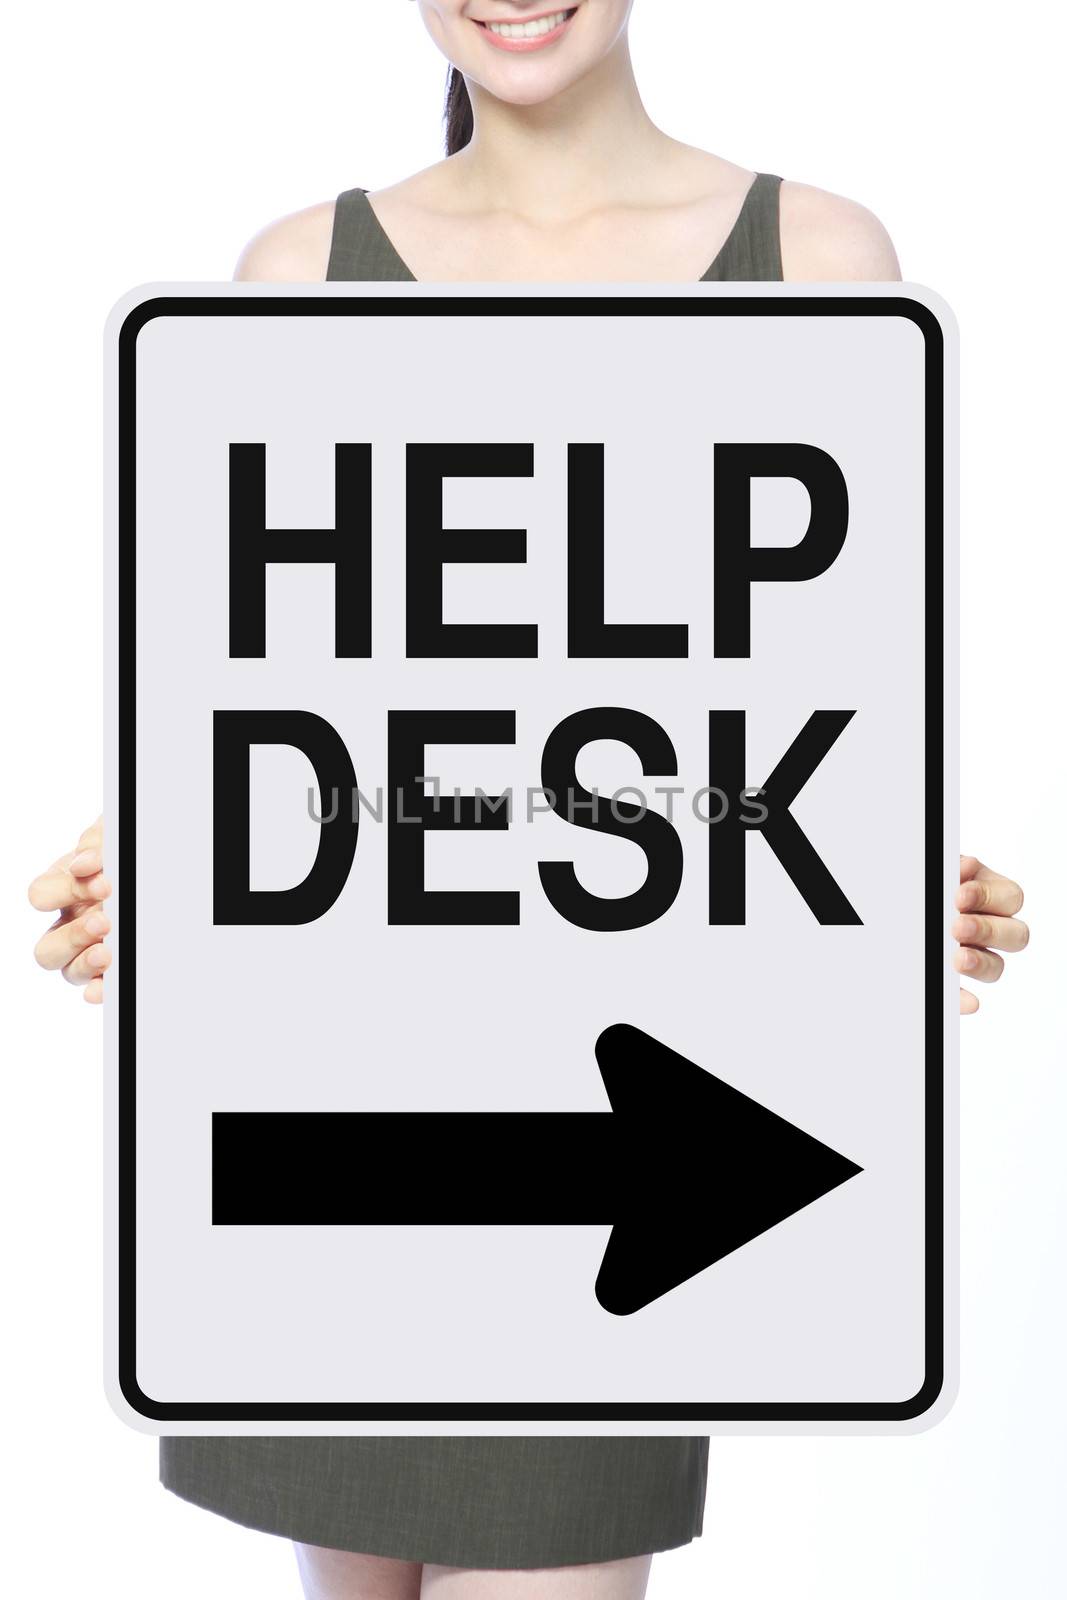 Help Desk This Way by rnl